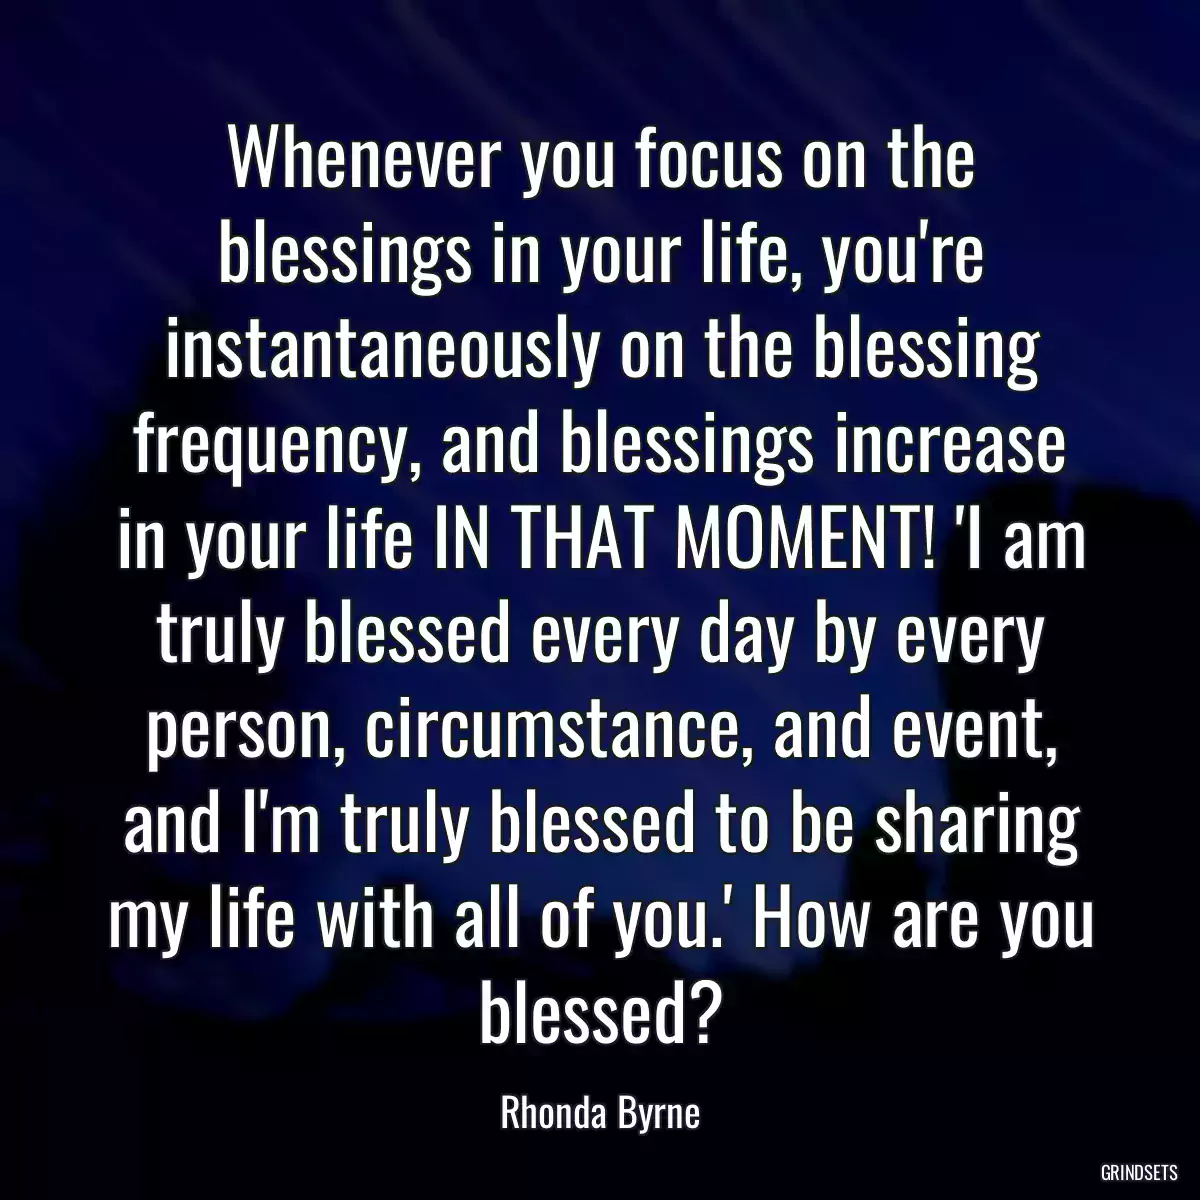 Whenever you focus on the blessings in your life, you\'re instantaneously on the blessing frequency, and blessings increase in your life IN THAT MOMENT! \'I am truly blessed every day by every person, circumstance, and event, and I\'m truly blessed to be sharing my life with all of you.\' How are you blessed?